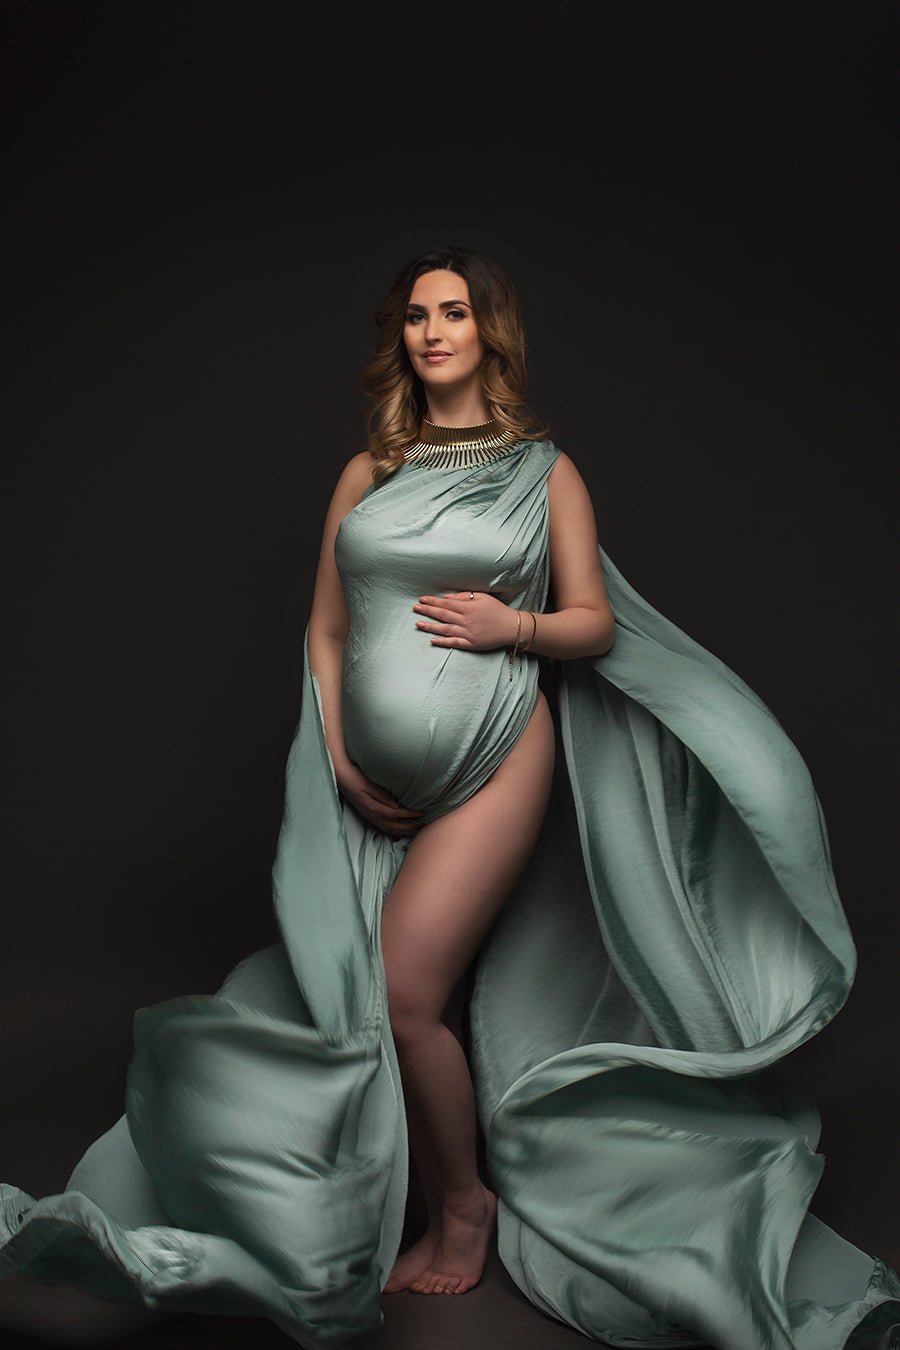 pregnant model poses wearing a draping fabric in azur color stylished as a dress. she has a big gold necklace to match the look.